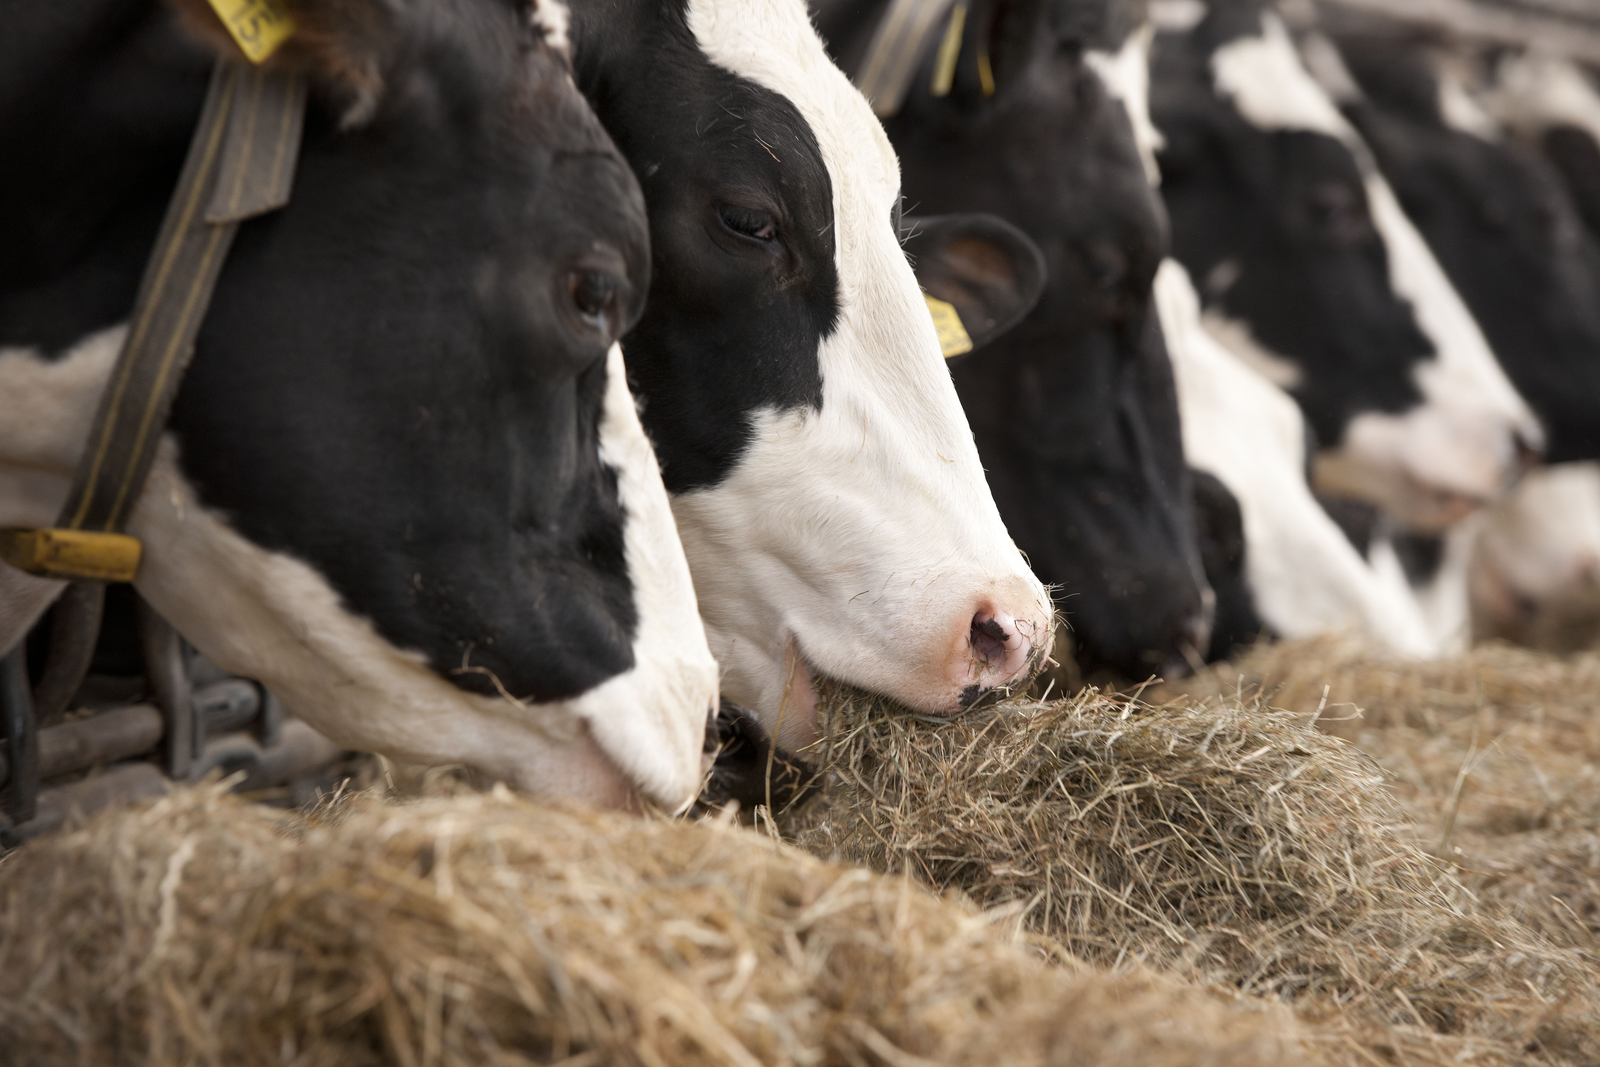 Evidence suggests that getting the right additives to optimise feed can  lead to increased animal health and wellbeing, production efficiency and  increased income on the dairy farm. Photo: Mark Pasveer.